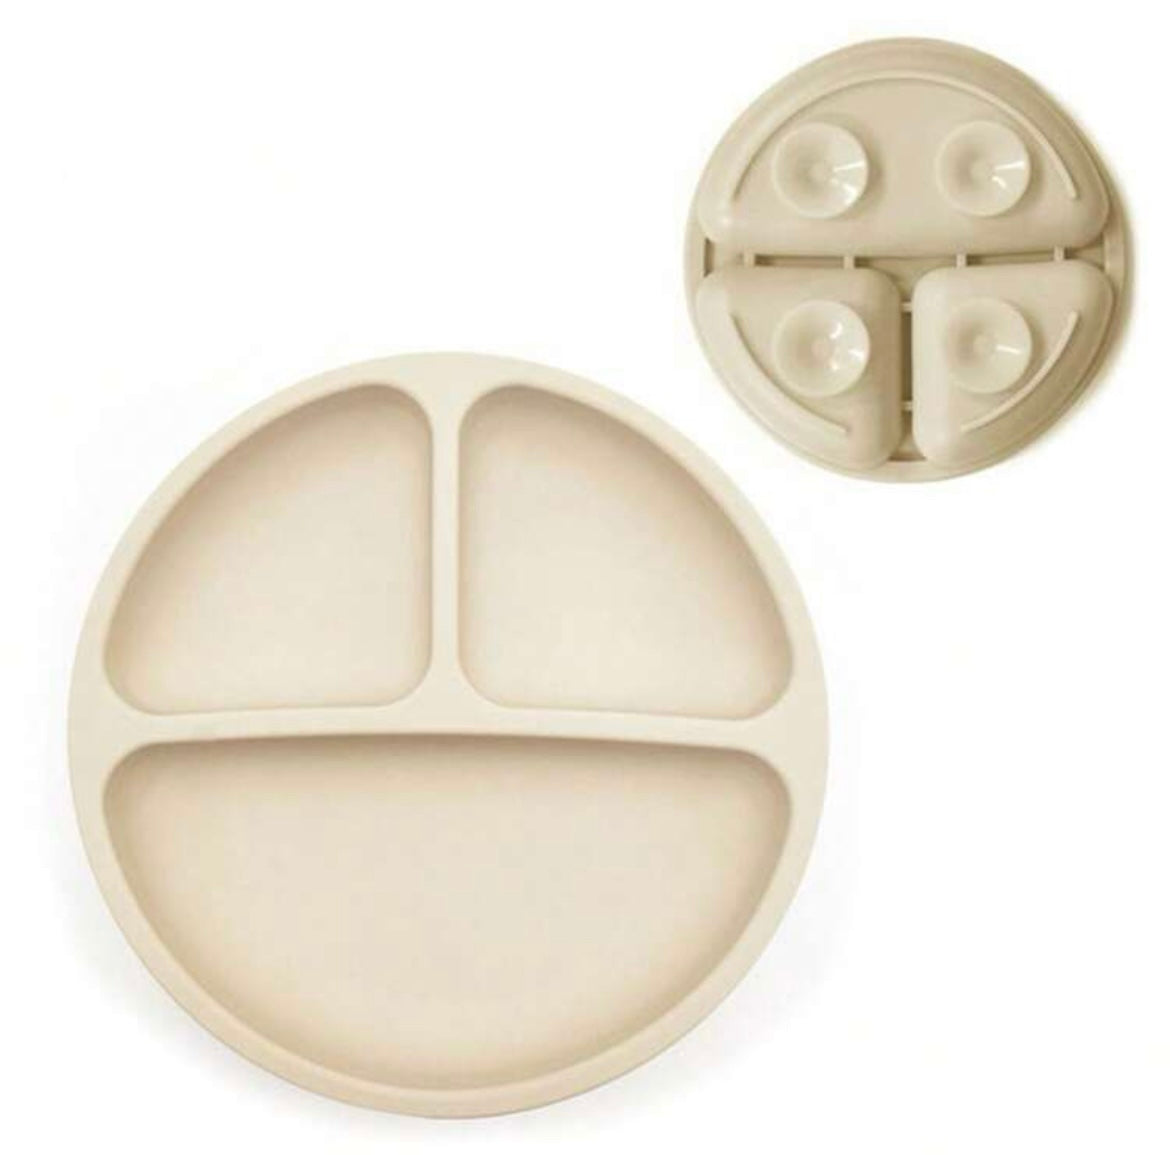 Silicone suction plates - 3 compartments